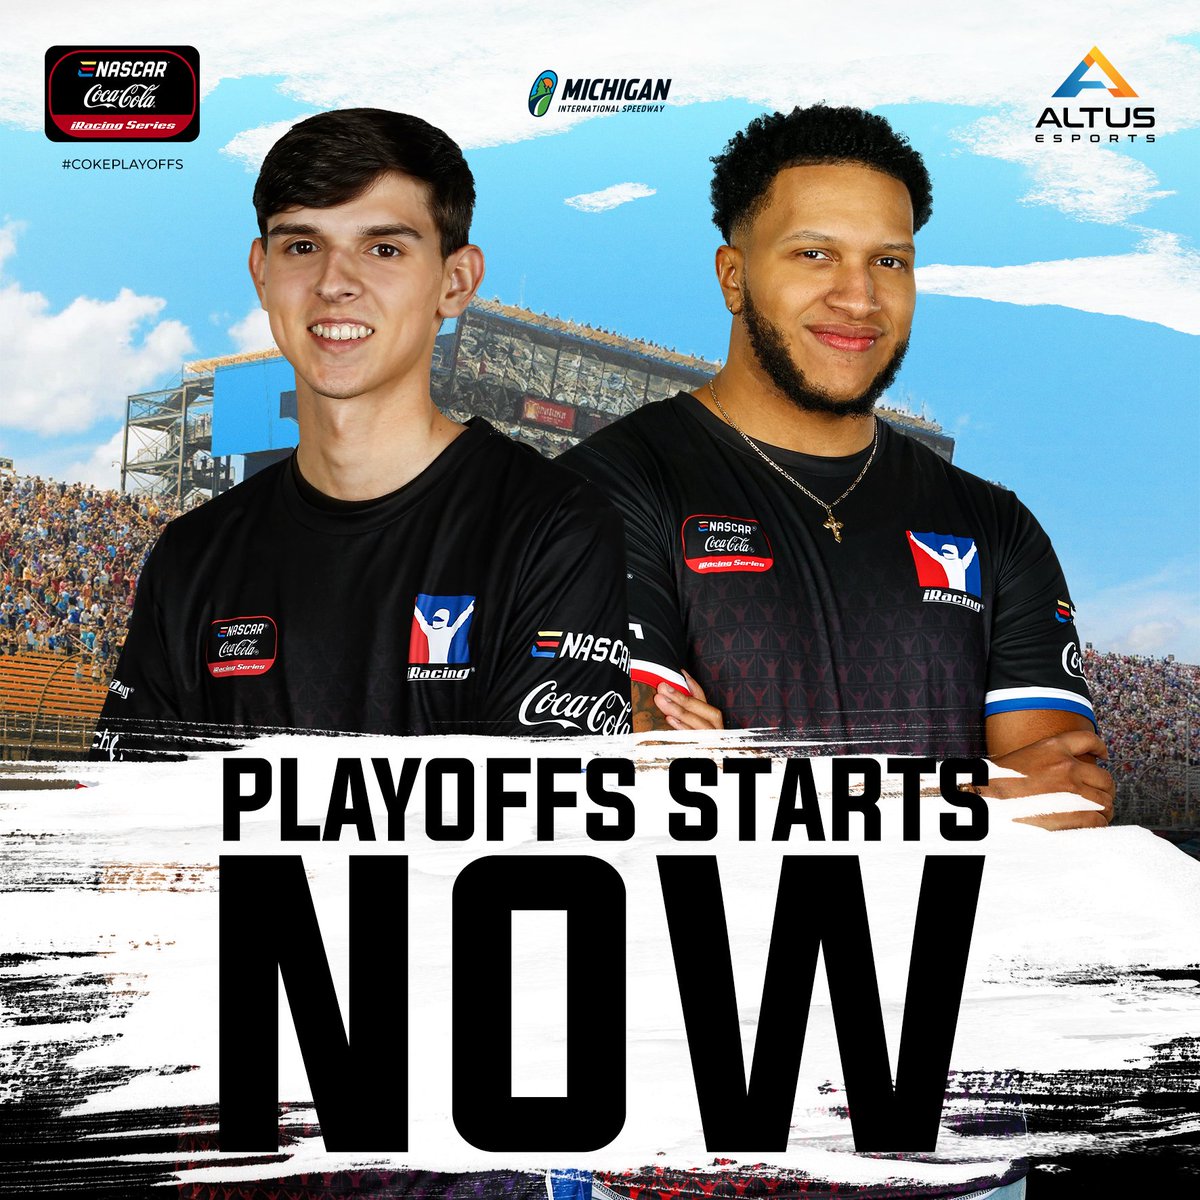 The scene is set and the eNASCAR Coca-Cola @iRacing Series kicks off at 9PM ET today from @MISpeedway. We're proud to have rookies @TuckerMinter and @JordyL0pez as part of the playoffs puzzle. Let's go get it! 👊 #WeAreAltus @realVRS @Altus_Engineer